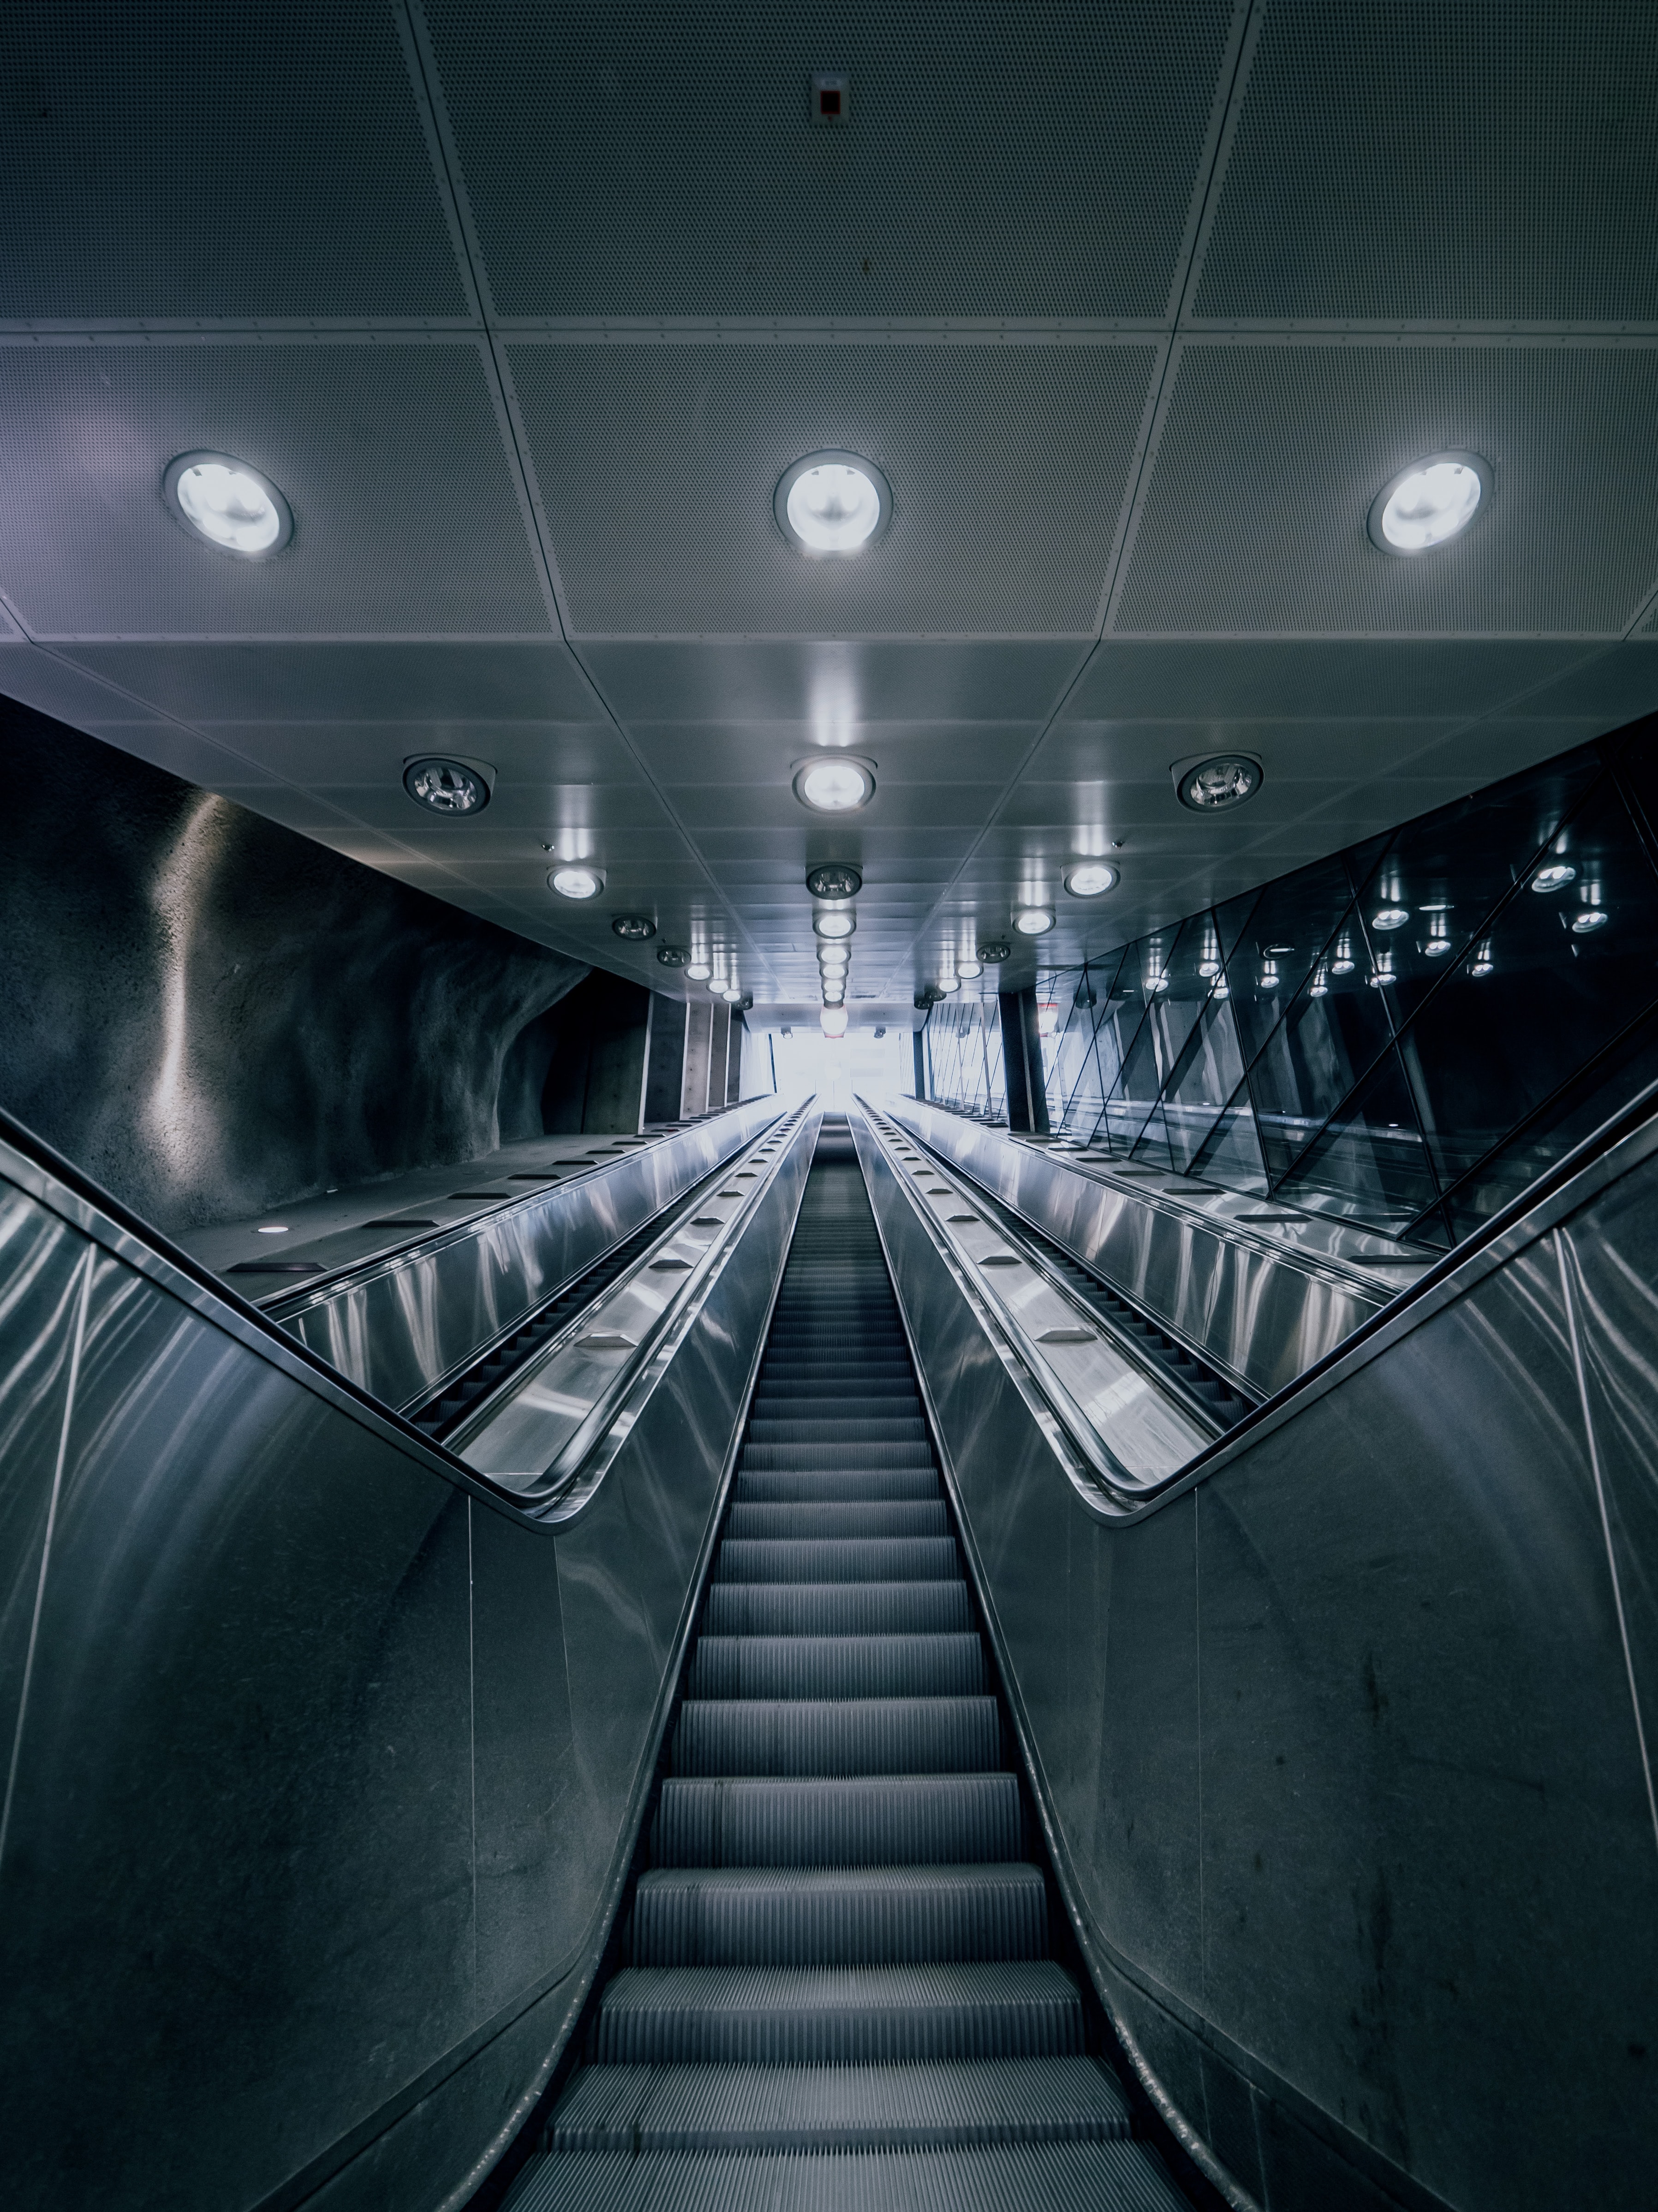 miscellanea, miscellaneous, lamp, stairs, ladder, steps, lamps, metro, subway, escalator cell phone wallpapers